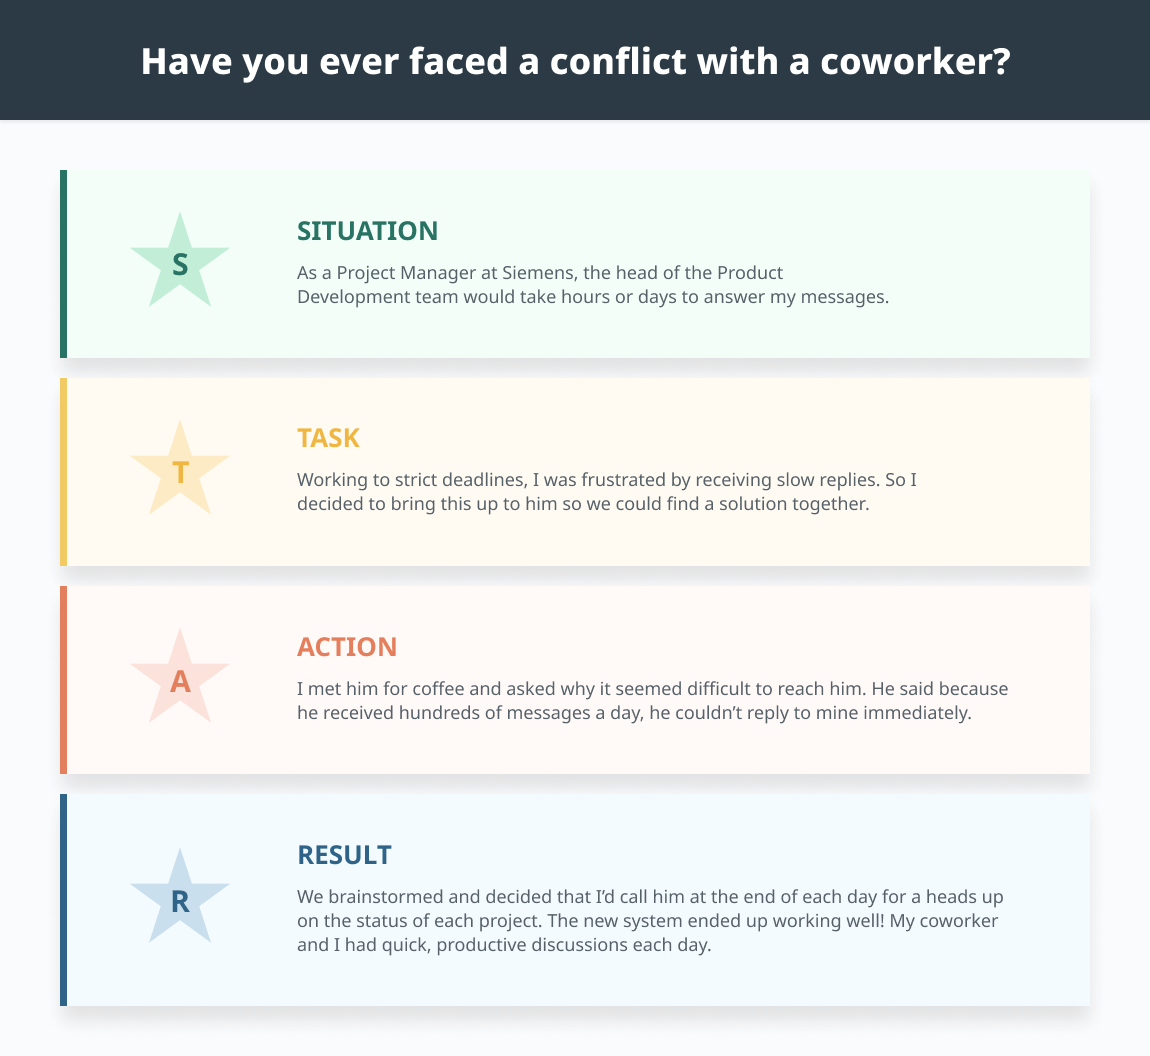 An example of the STAR method interview technique being broken down into four answers to represent how an applicant deals with conflict